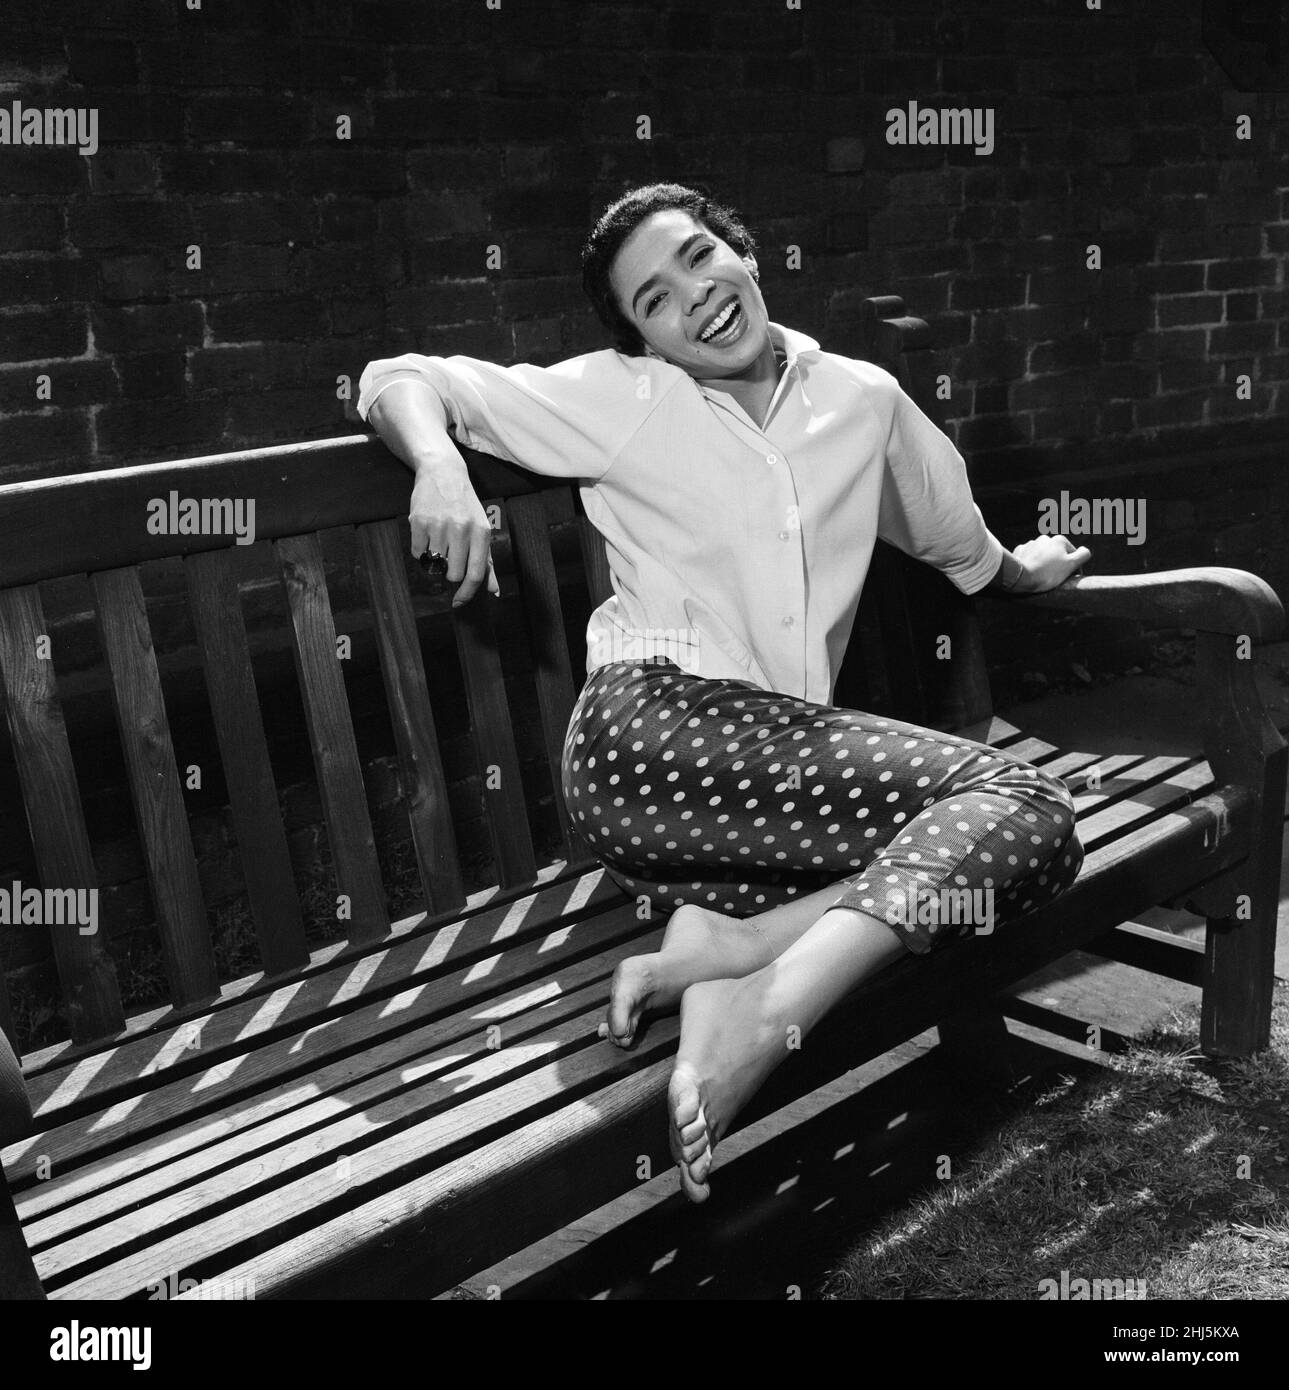 Shirley Bassey rehearsing for ITV's Frankie Howerd Show at ITV rehearsal studios in Sharpe House. She is rehearsing the song of 'If I had a needle and thread'. May 1957. Stock Photo